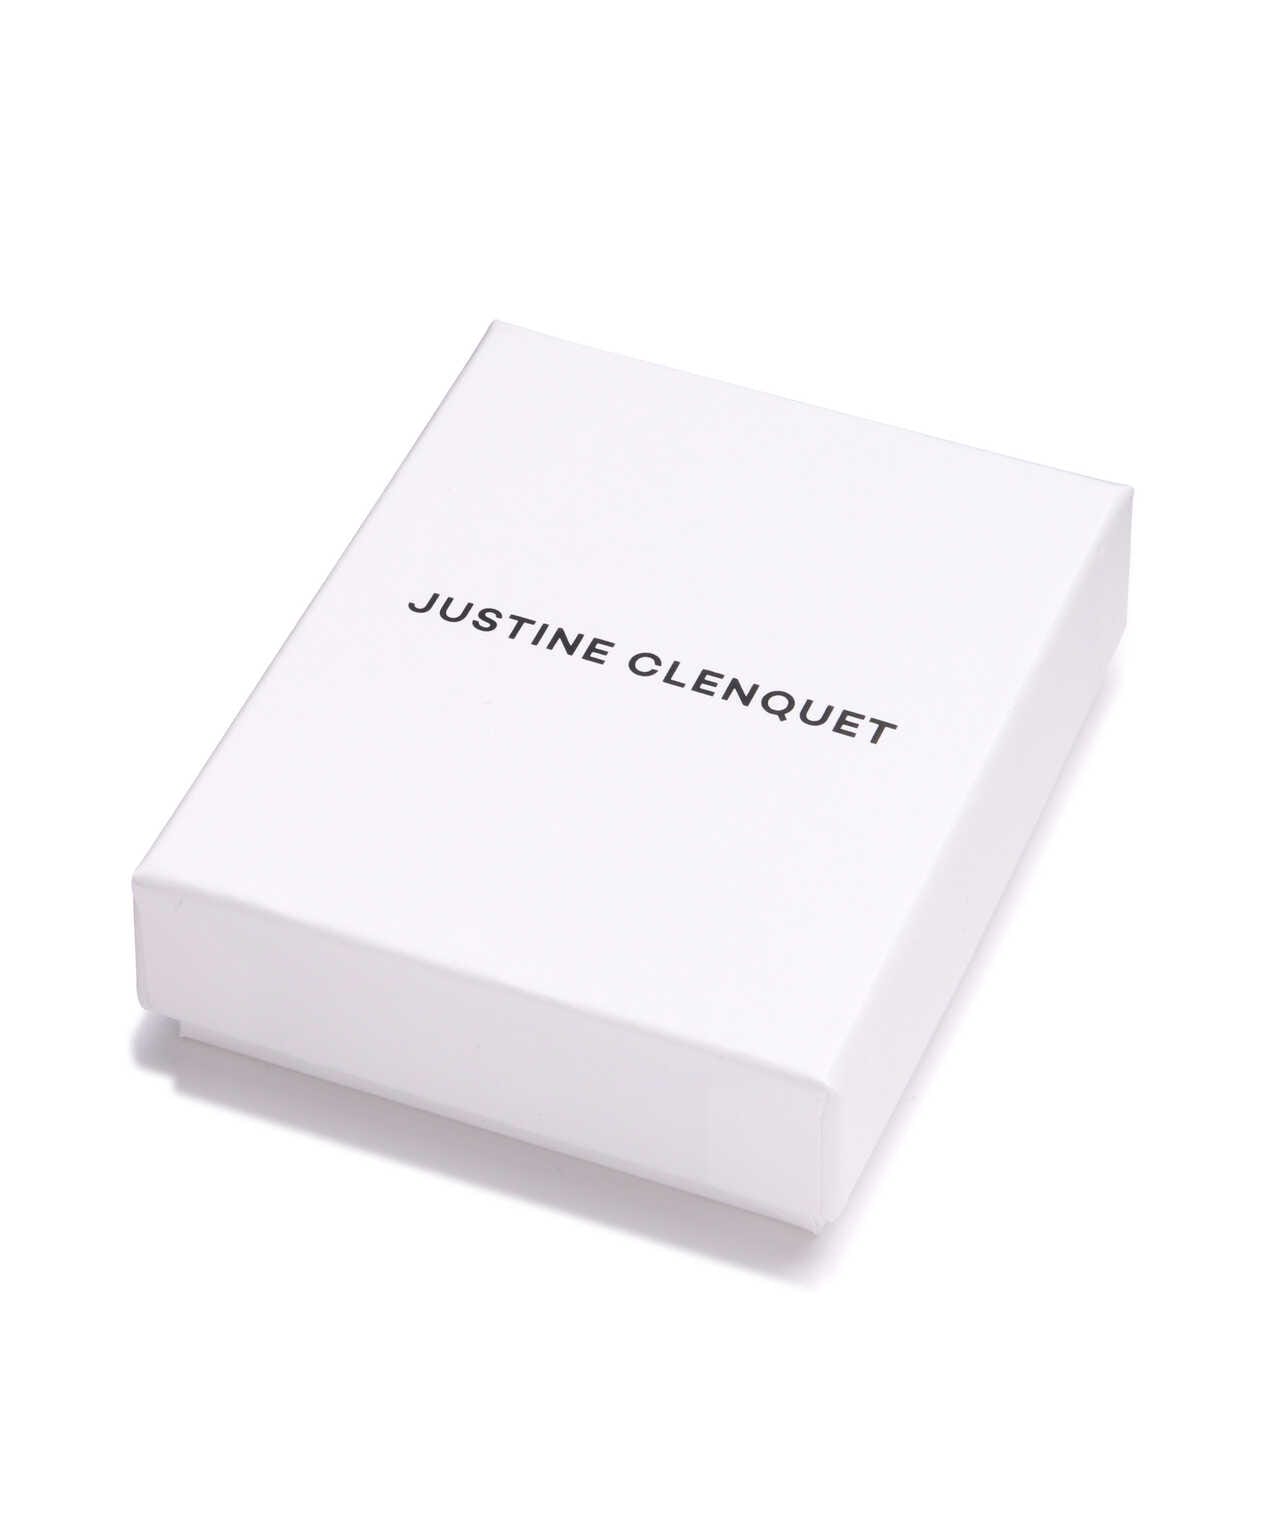 JUSTINE CLENQUET/ジュスティーヌ・クランケ/NEIL EARRING